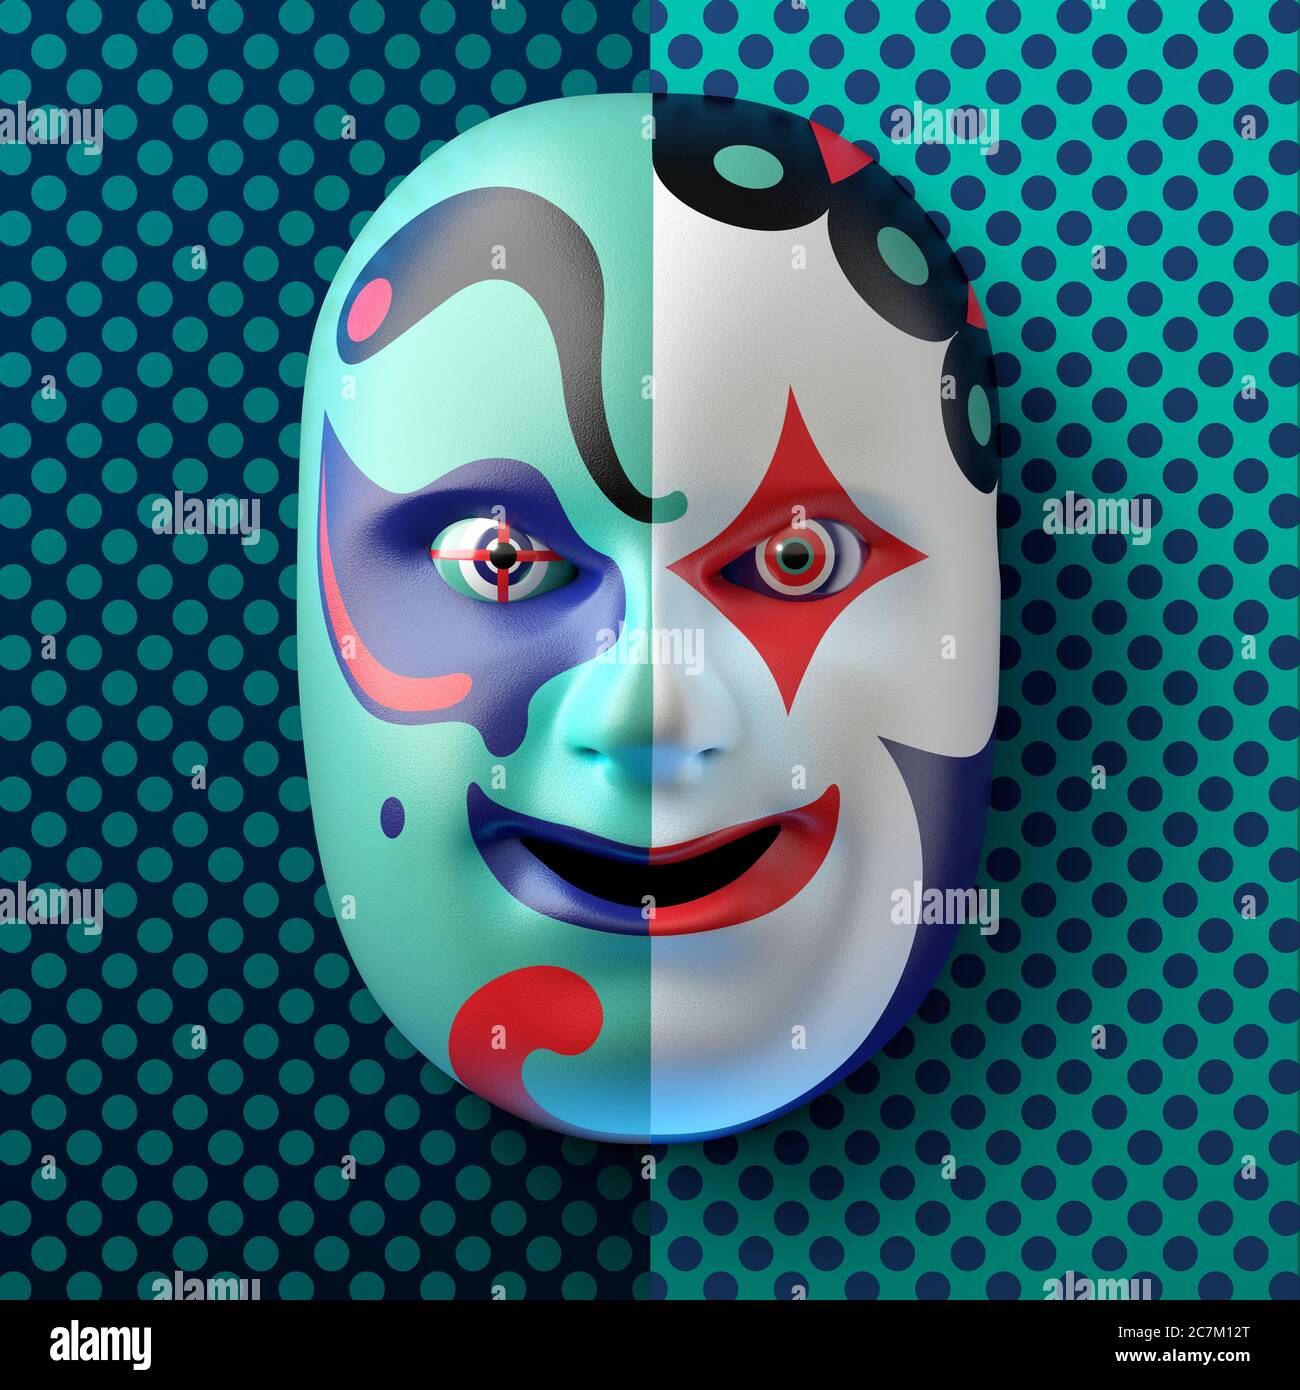 Asian theater mask with colored ornaments against a blue-turquoise dotted background Stock Photo